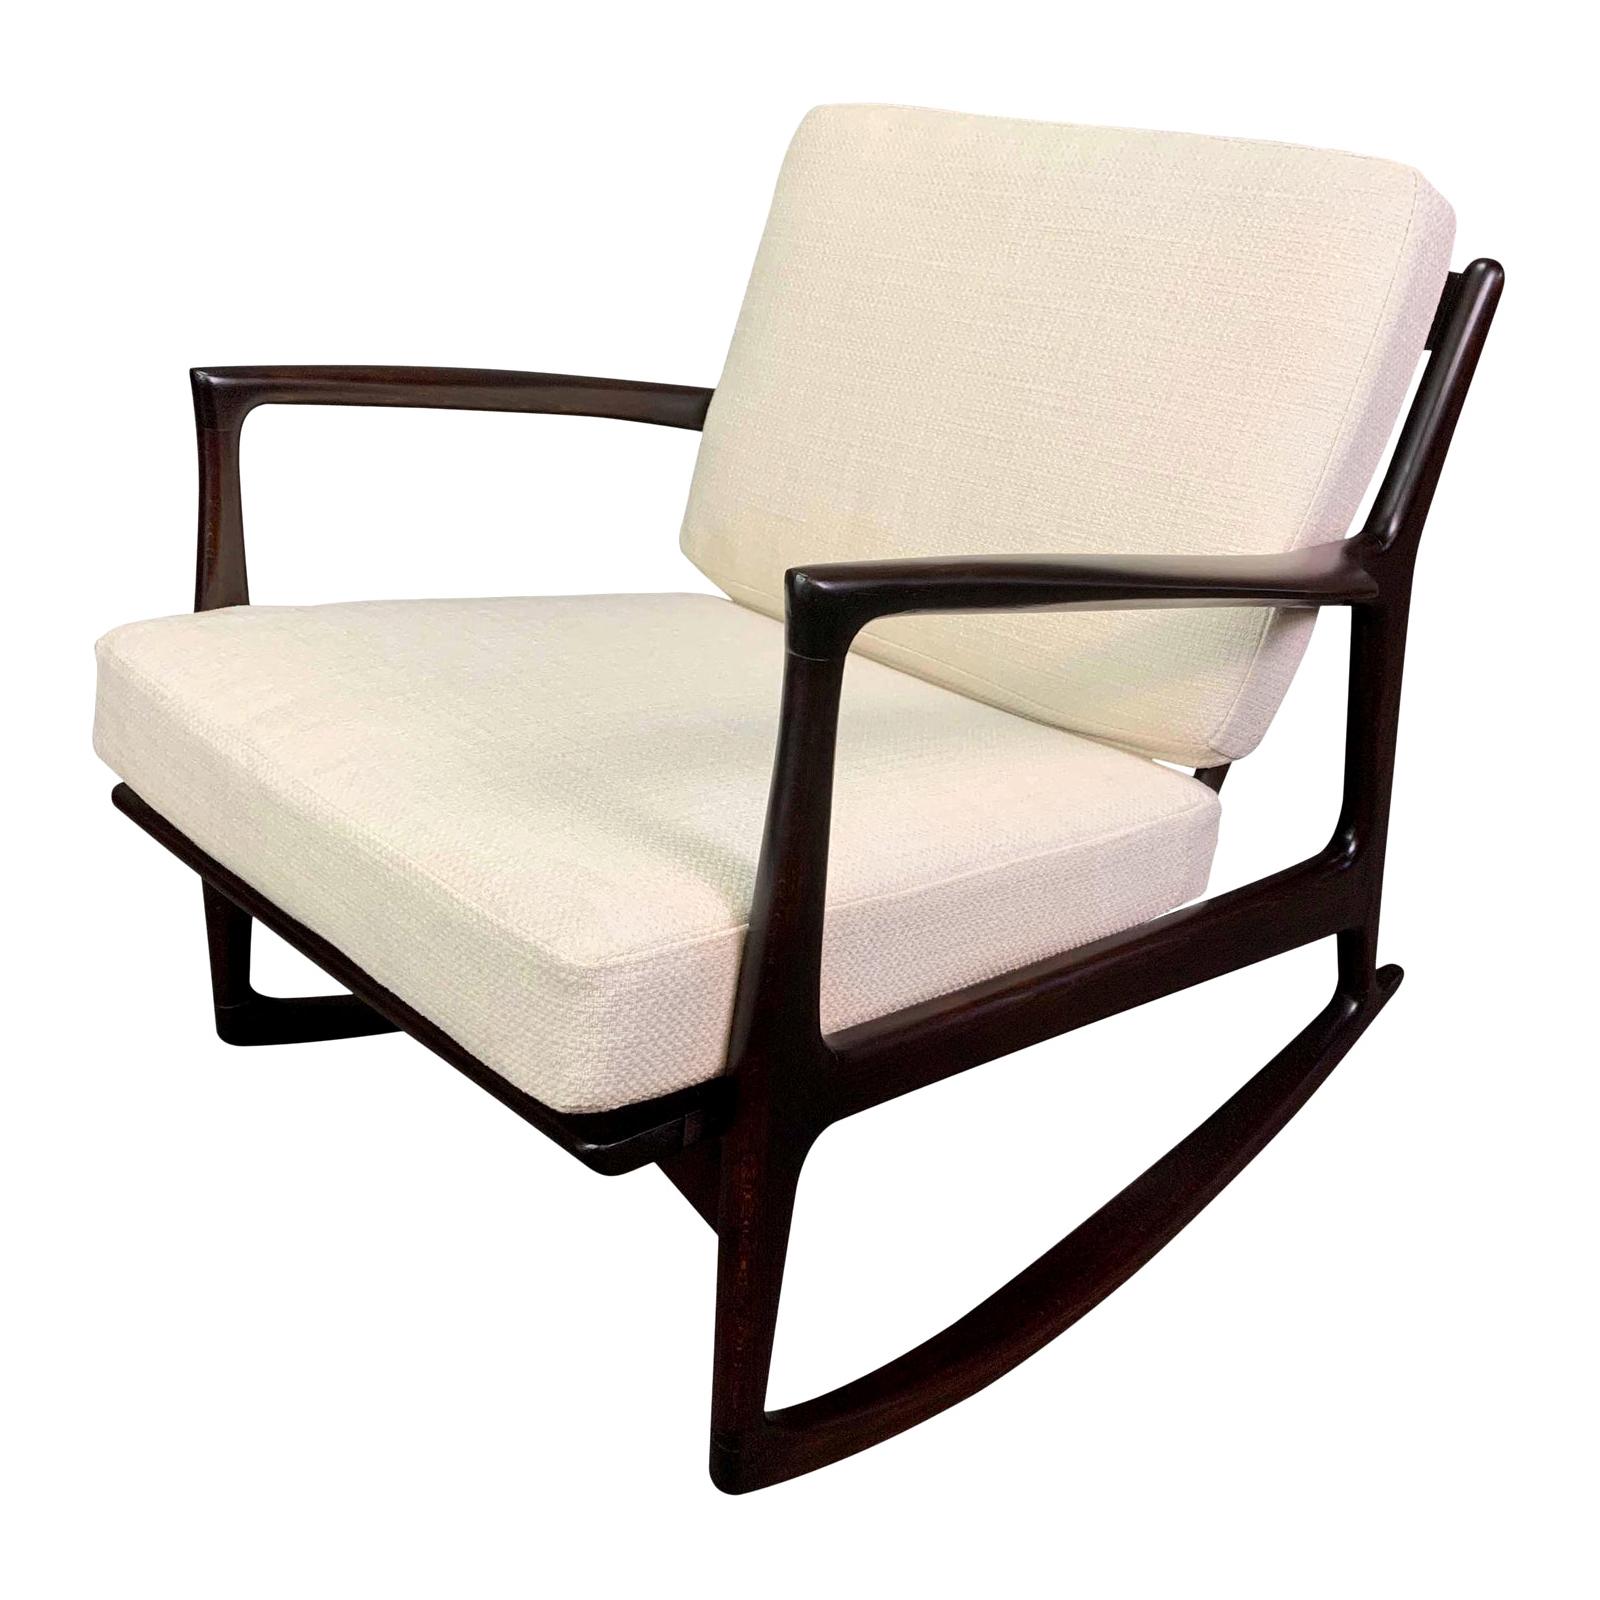 Vintage Danish Mid-Century Modern Rocking Chair by Kofod Larsen for Selig For Sale